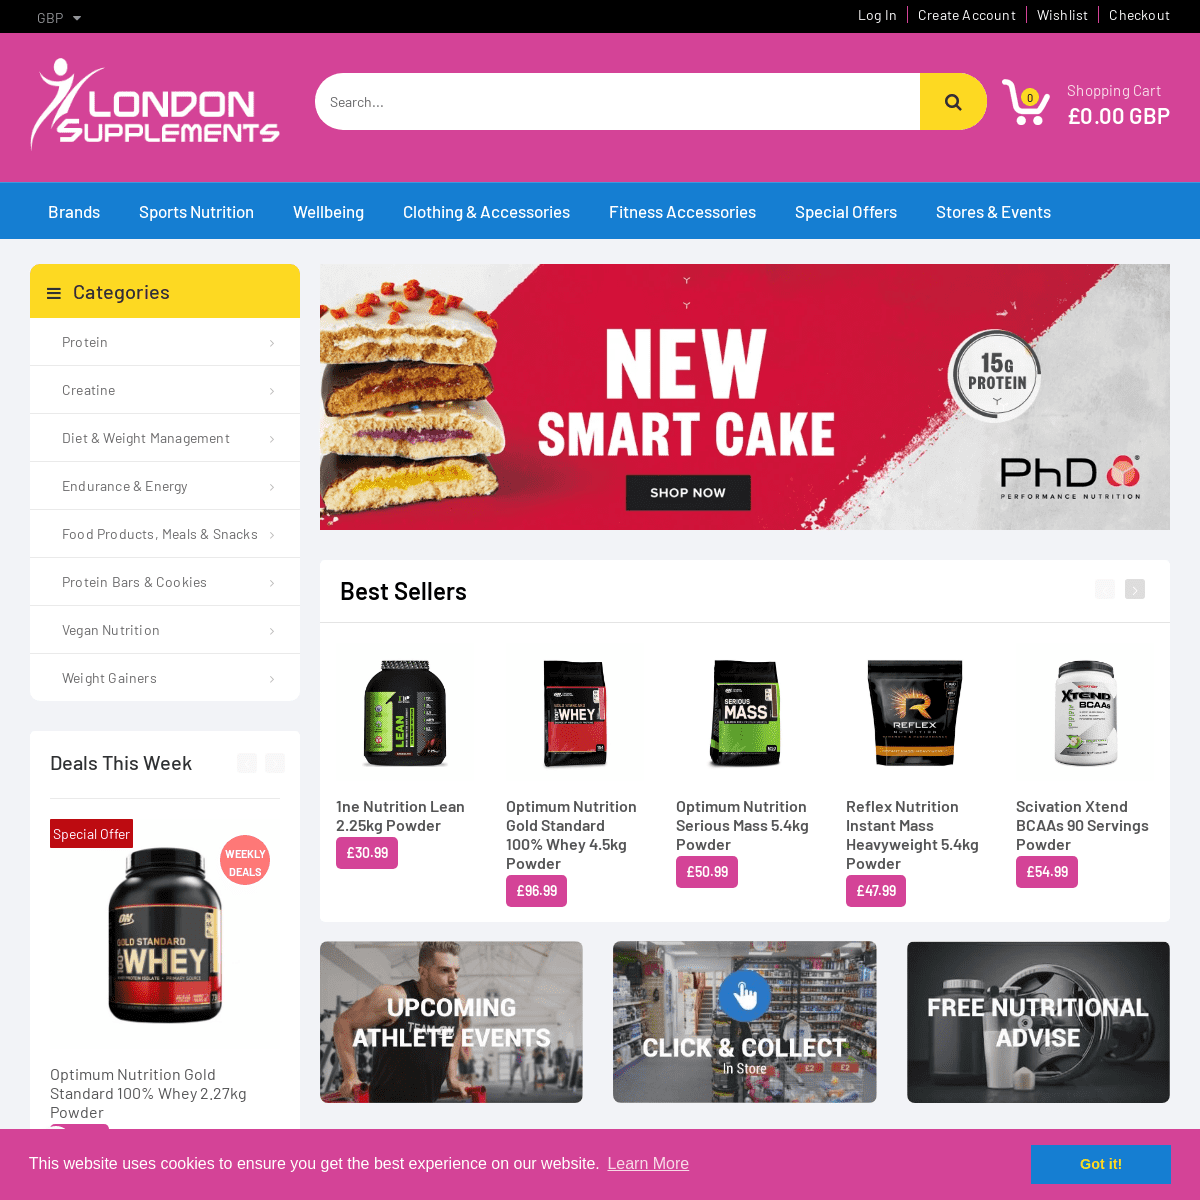 A complete backup of londonsupplements.co.uk